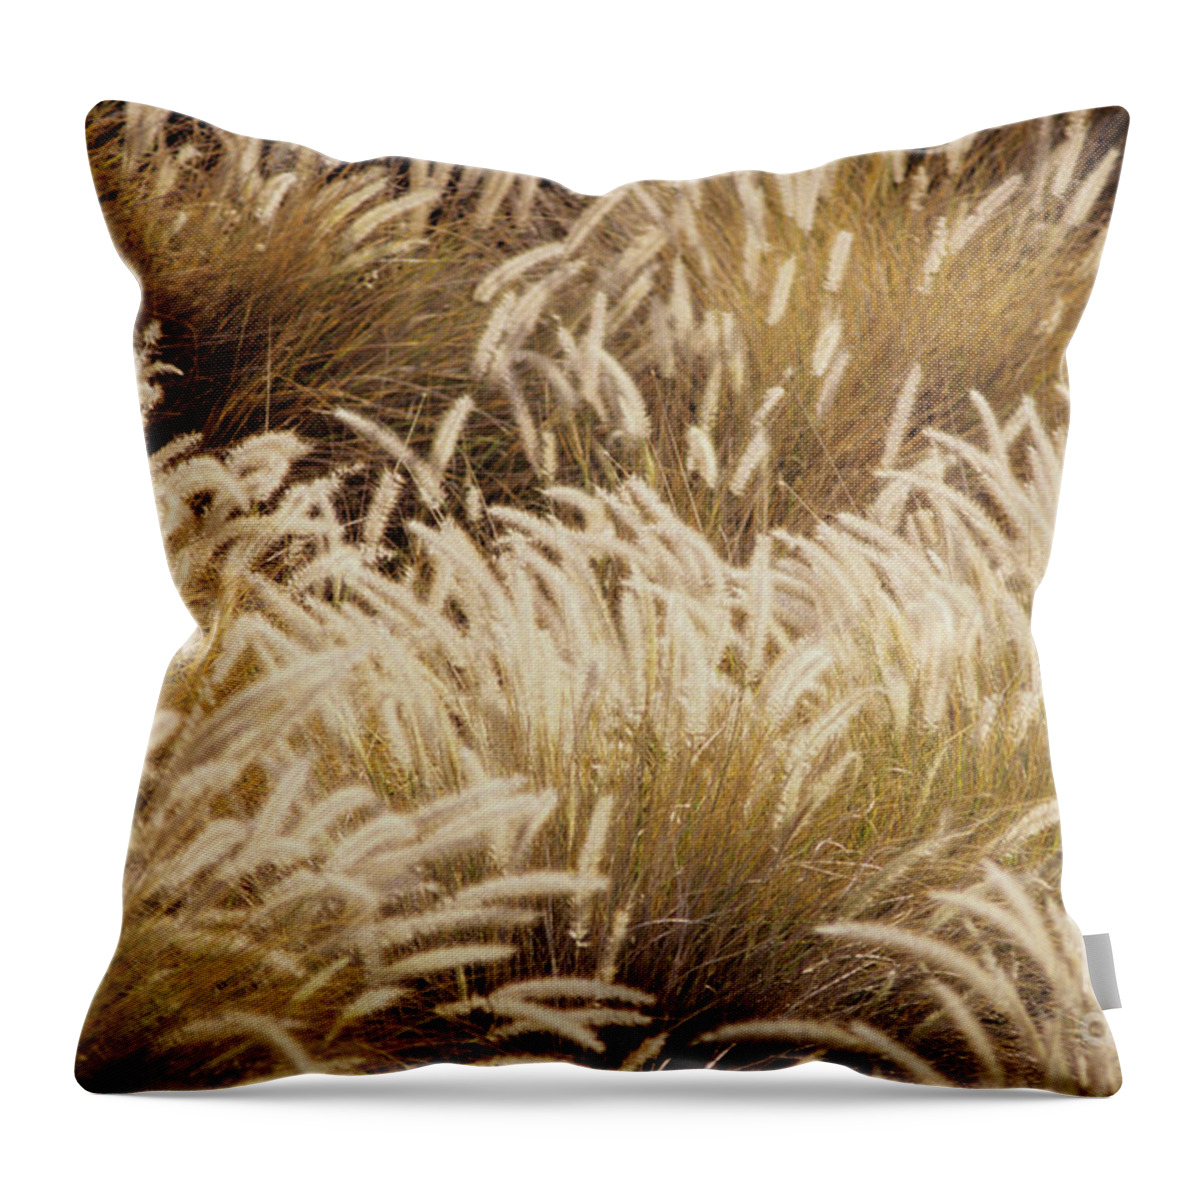 Beautiful Throw Pillow featuring the photograph Field of Feathers by Rita Ariyoshi - Printscapes